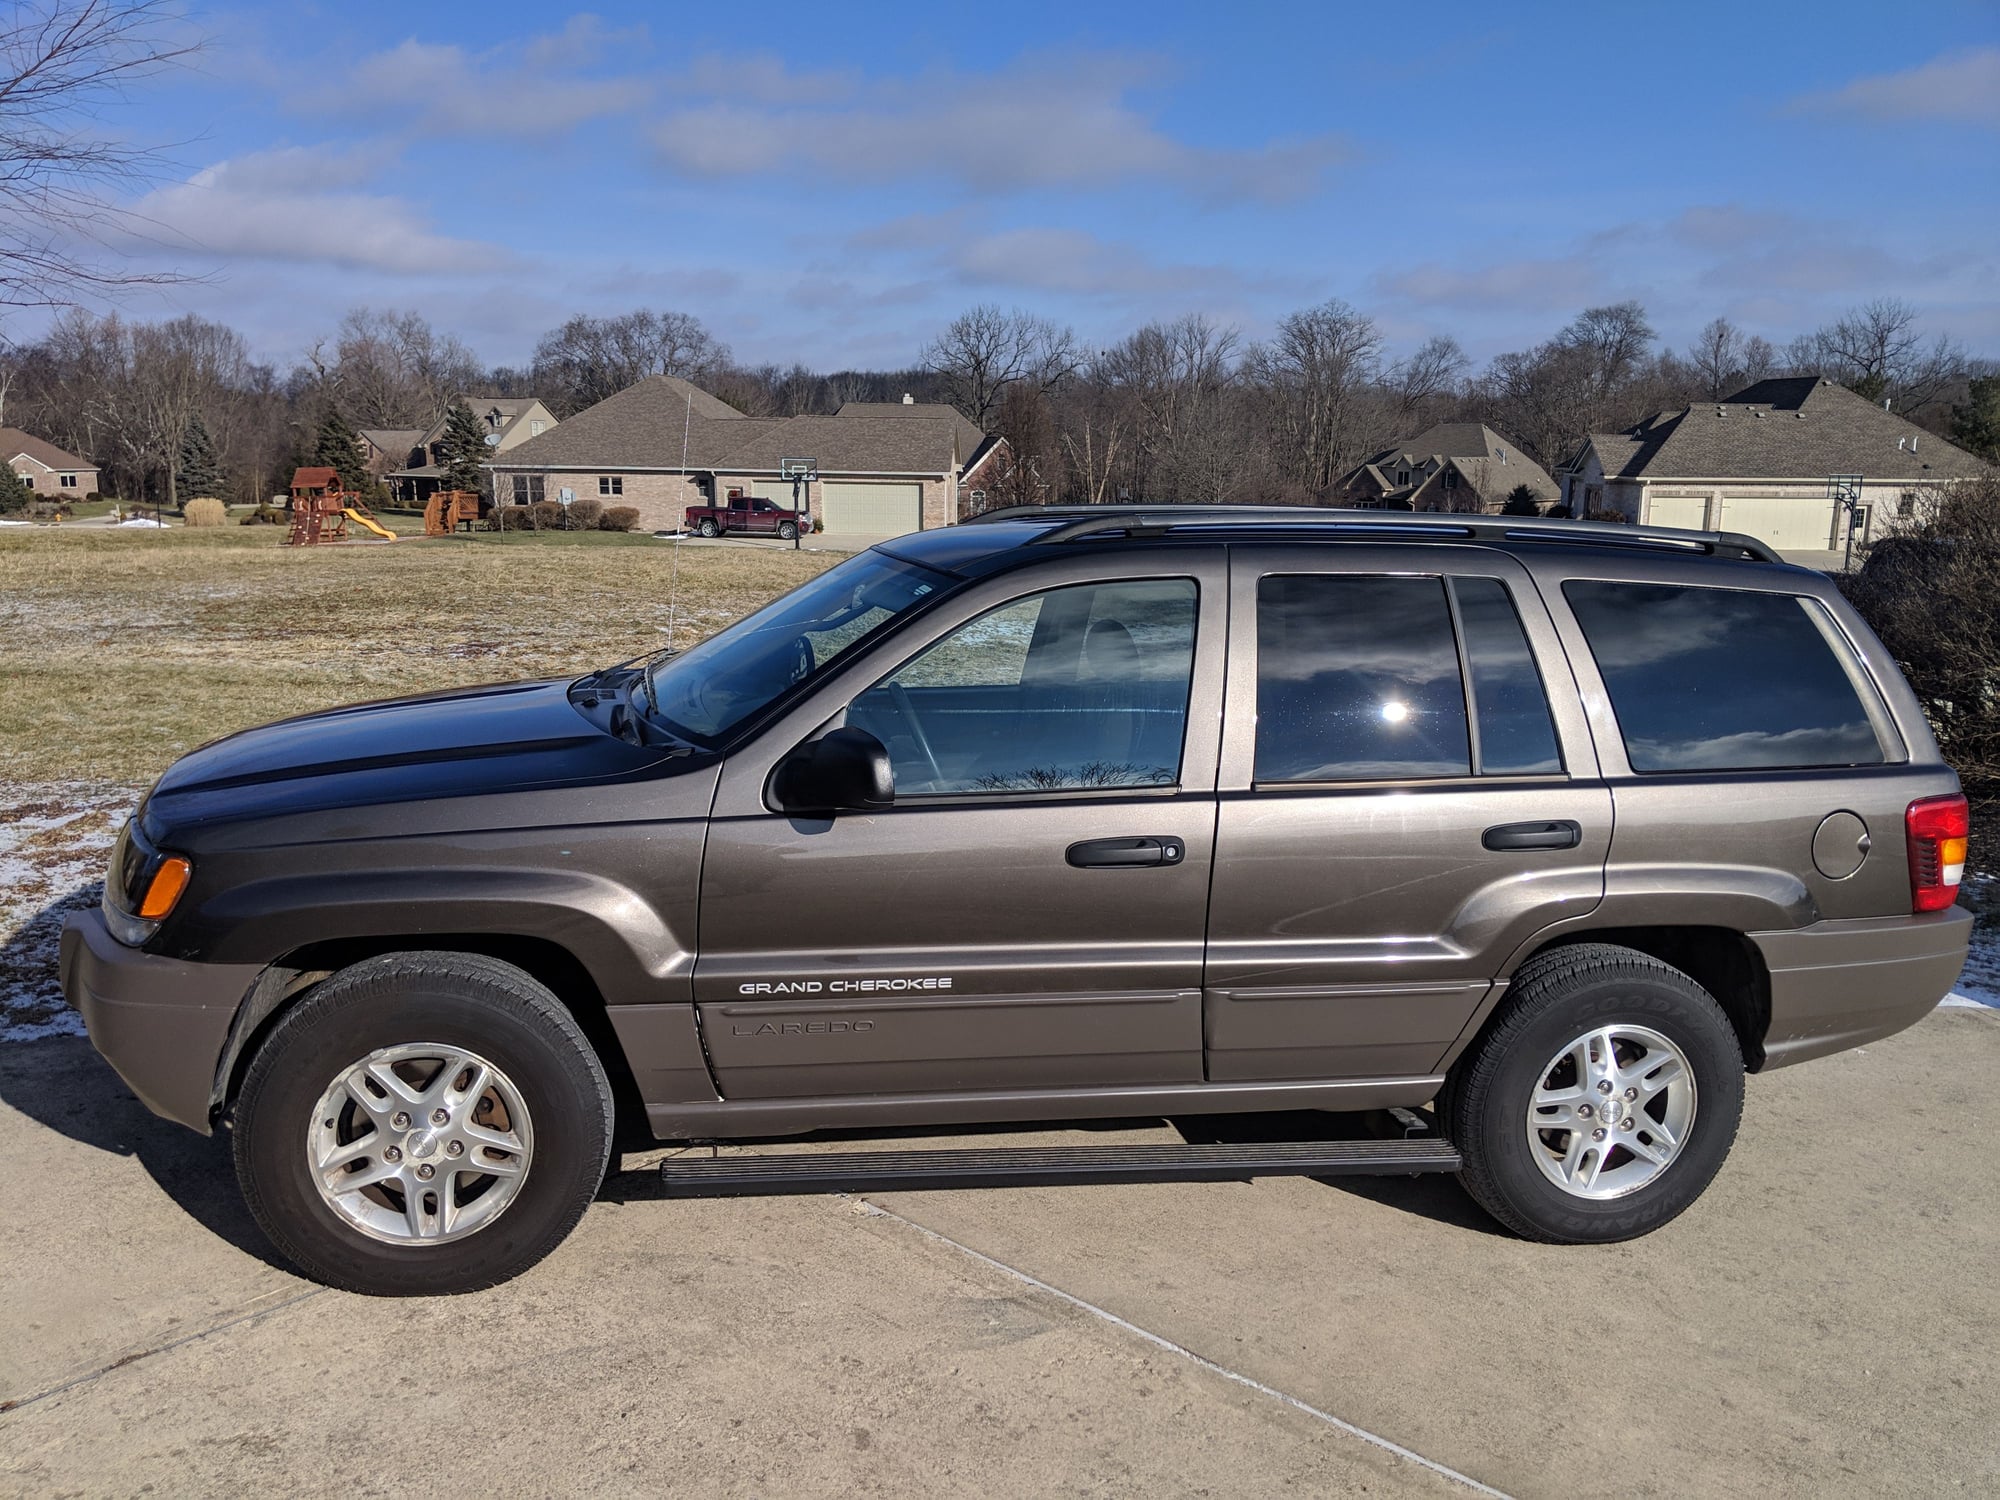 20002004 Grand Cherokee Questions The